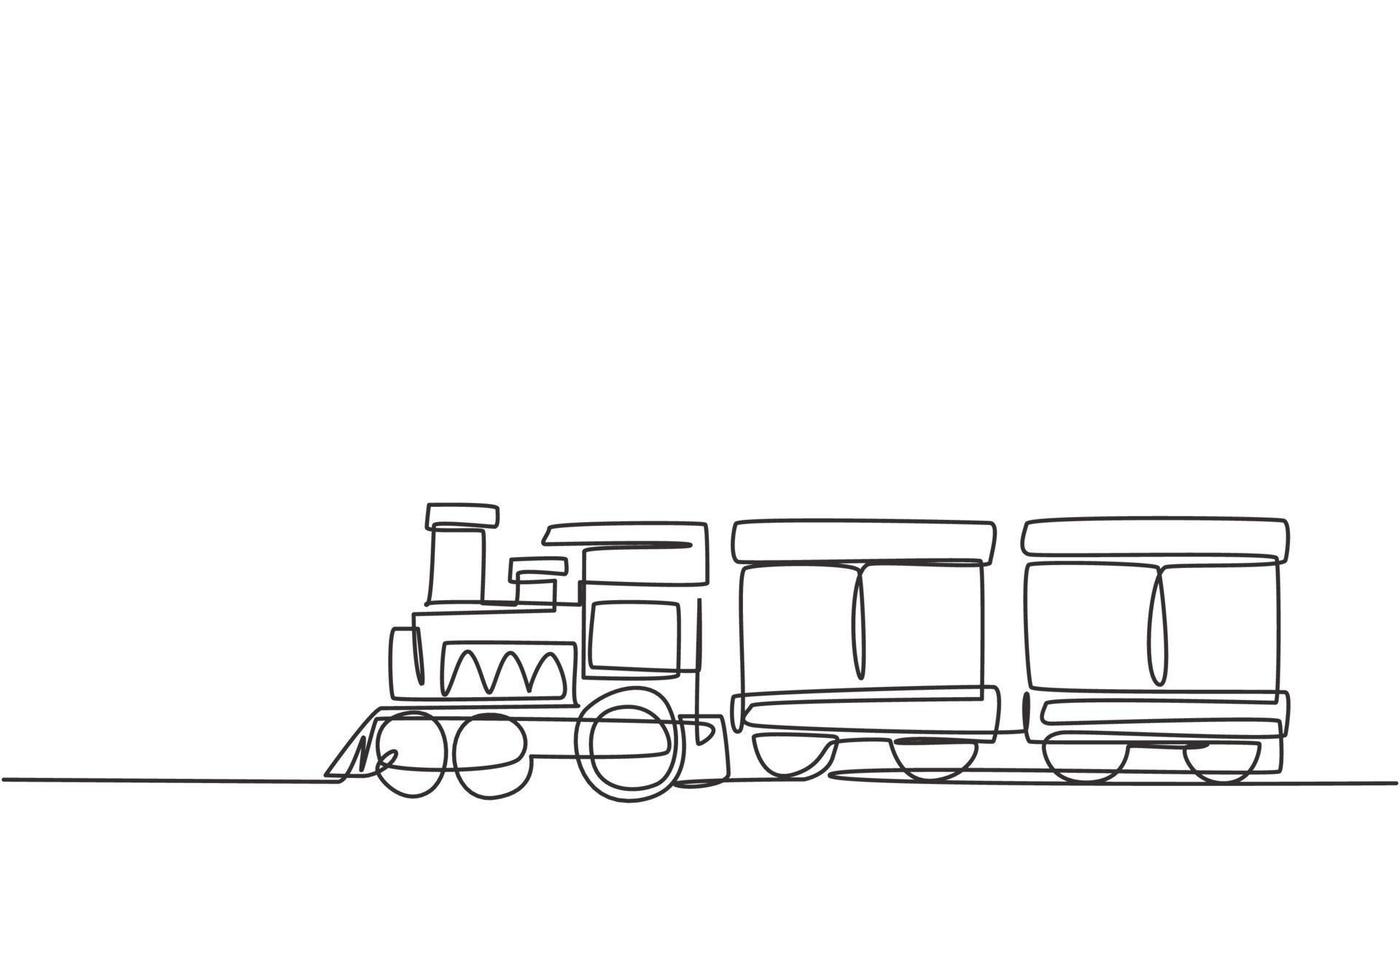 Single one line drawing of a train locomotive with two carriages in the form of a roving steam system in amusement park to transport passengers. Continuous line draw design graphic vector illustration